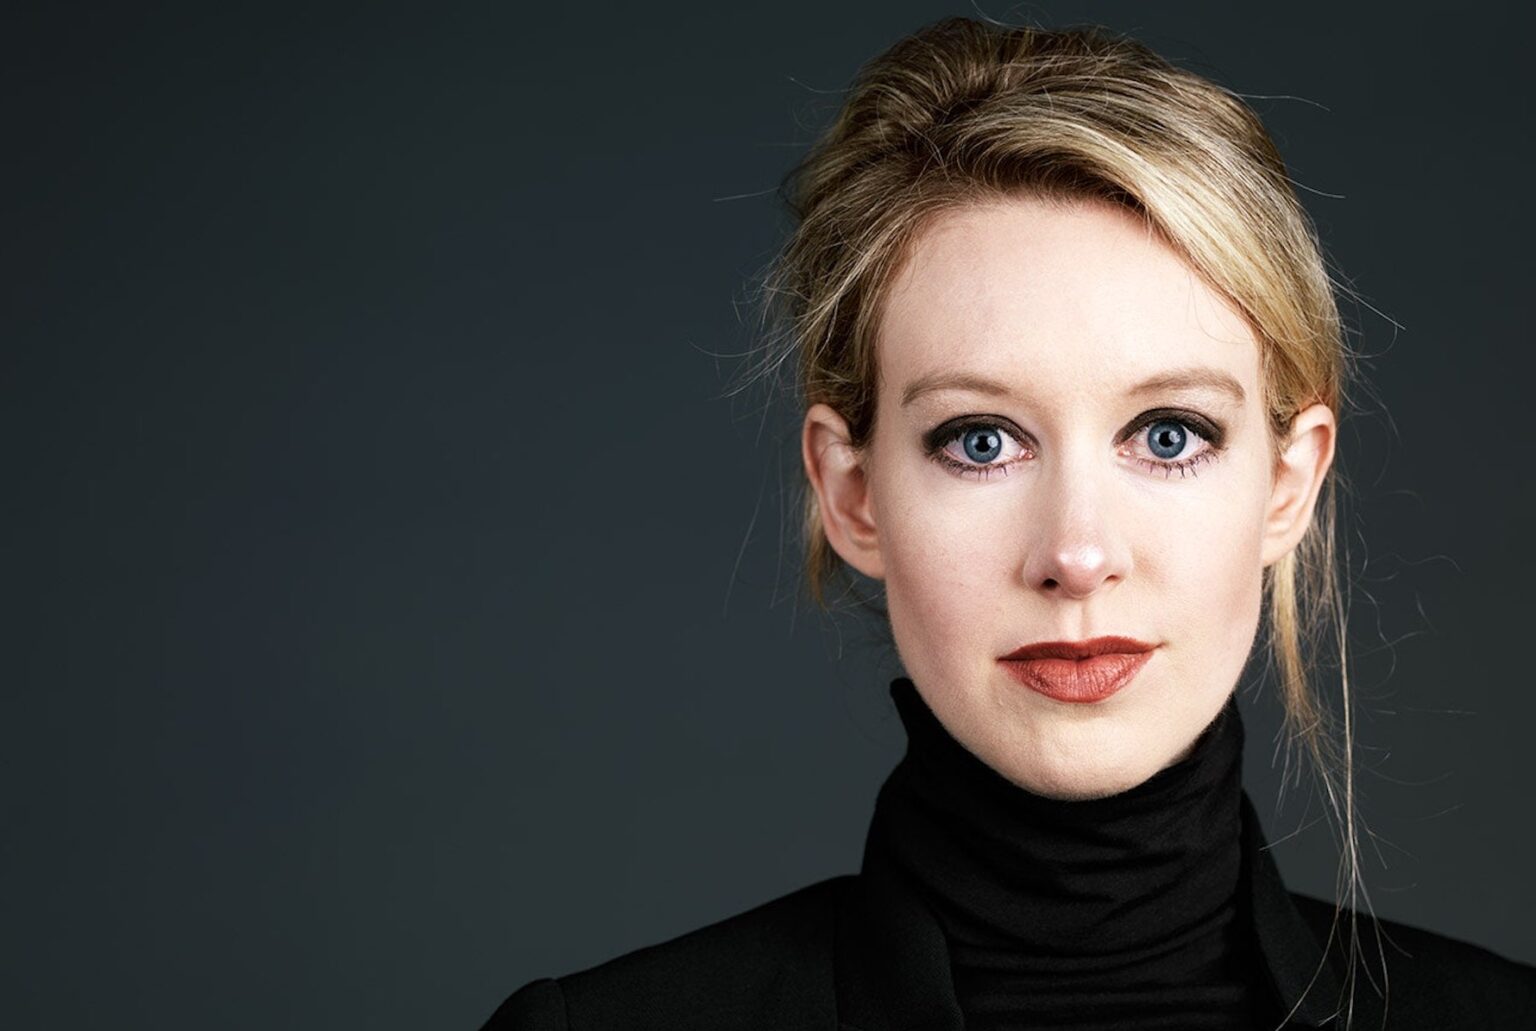 Is it true that Elizabeth Holmes was trying to imitate Steve Jobs to gain investors for her fraudulent biotech company? See who Elizabeth Holmes really is.